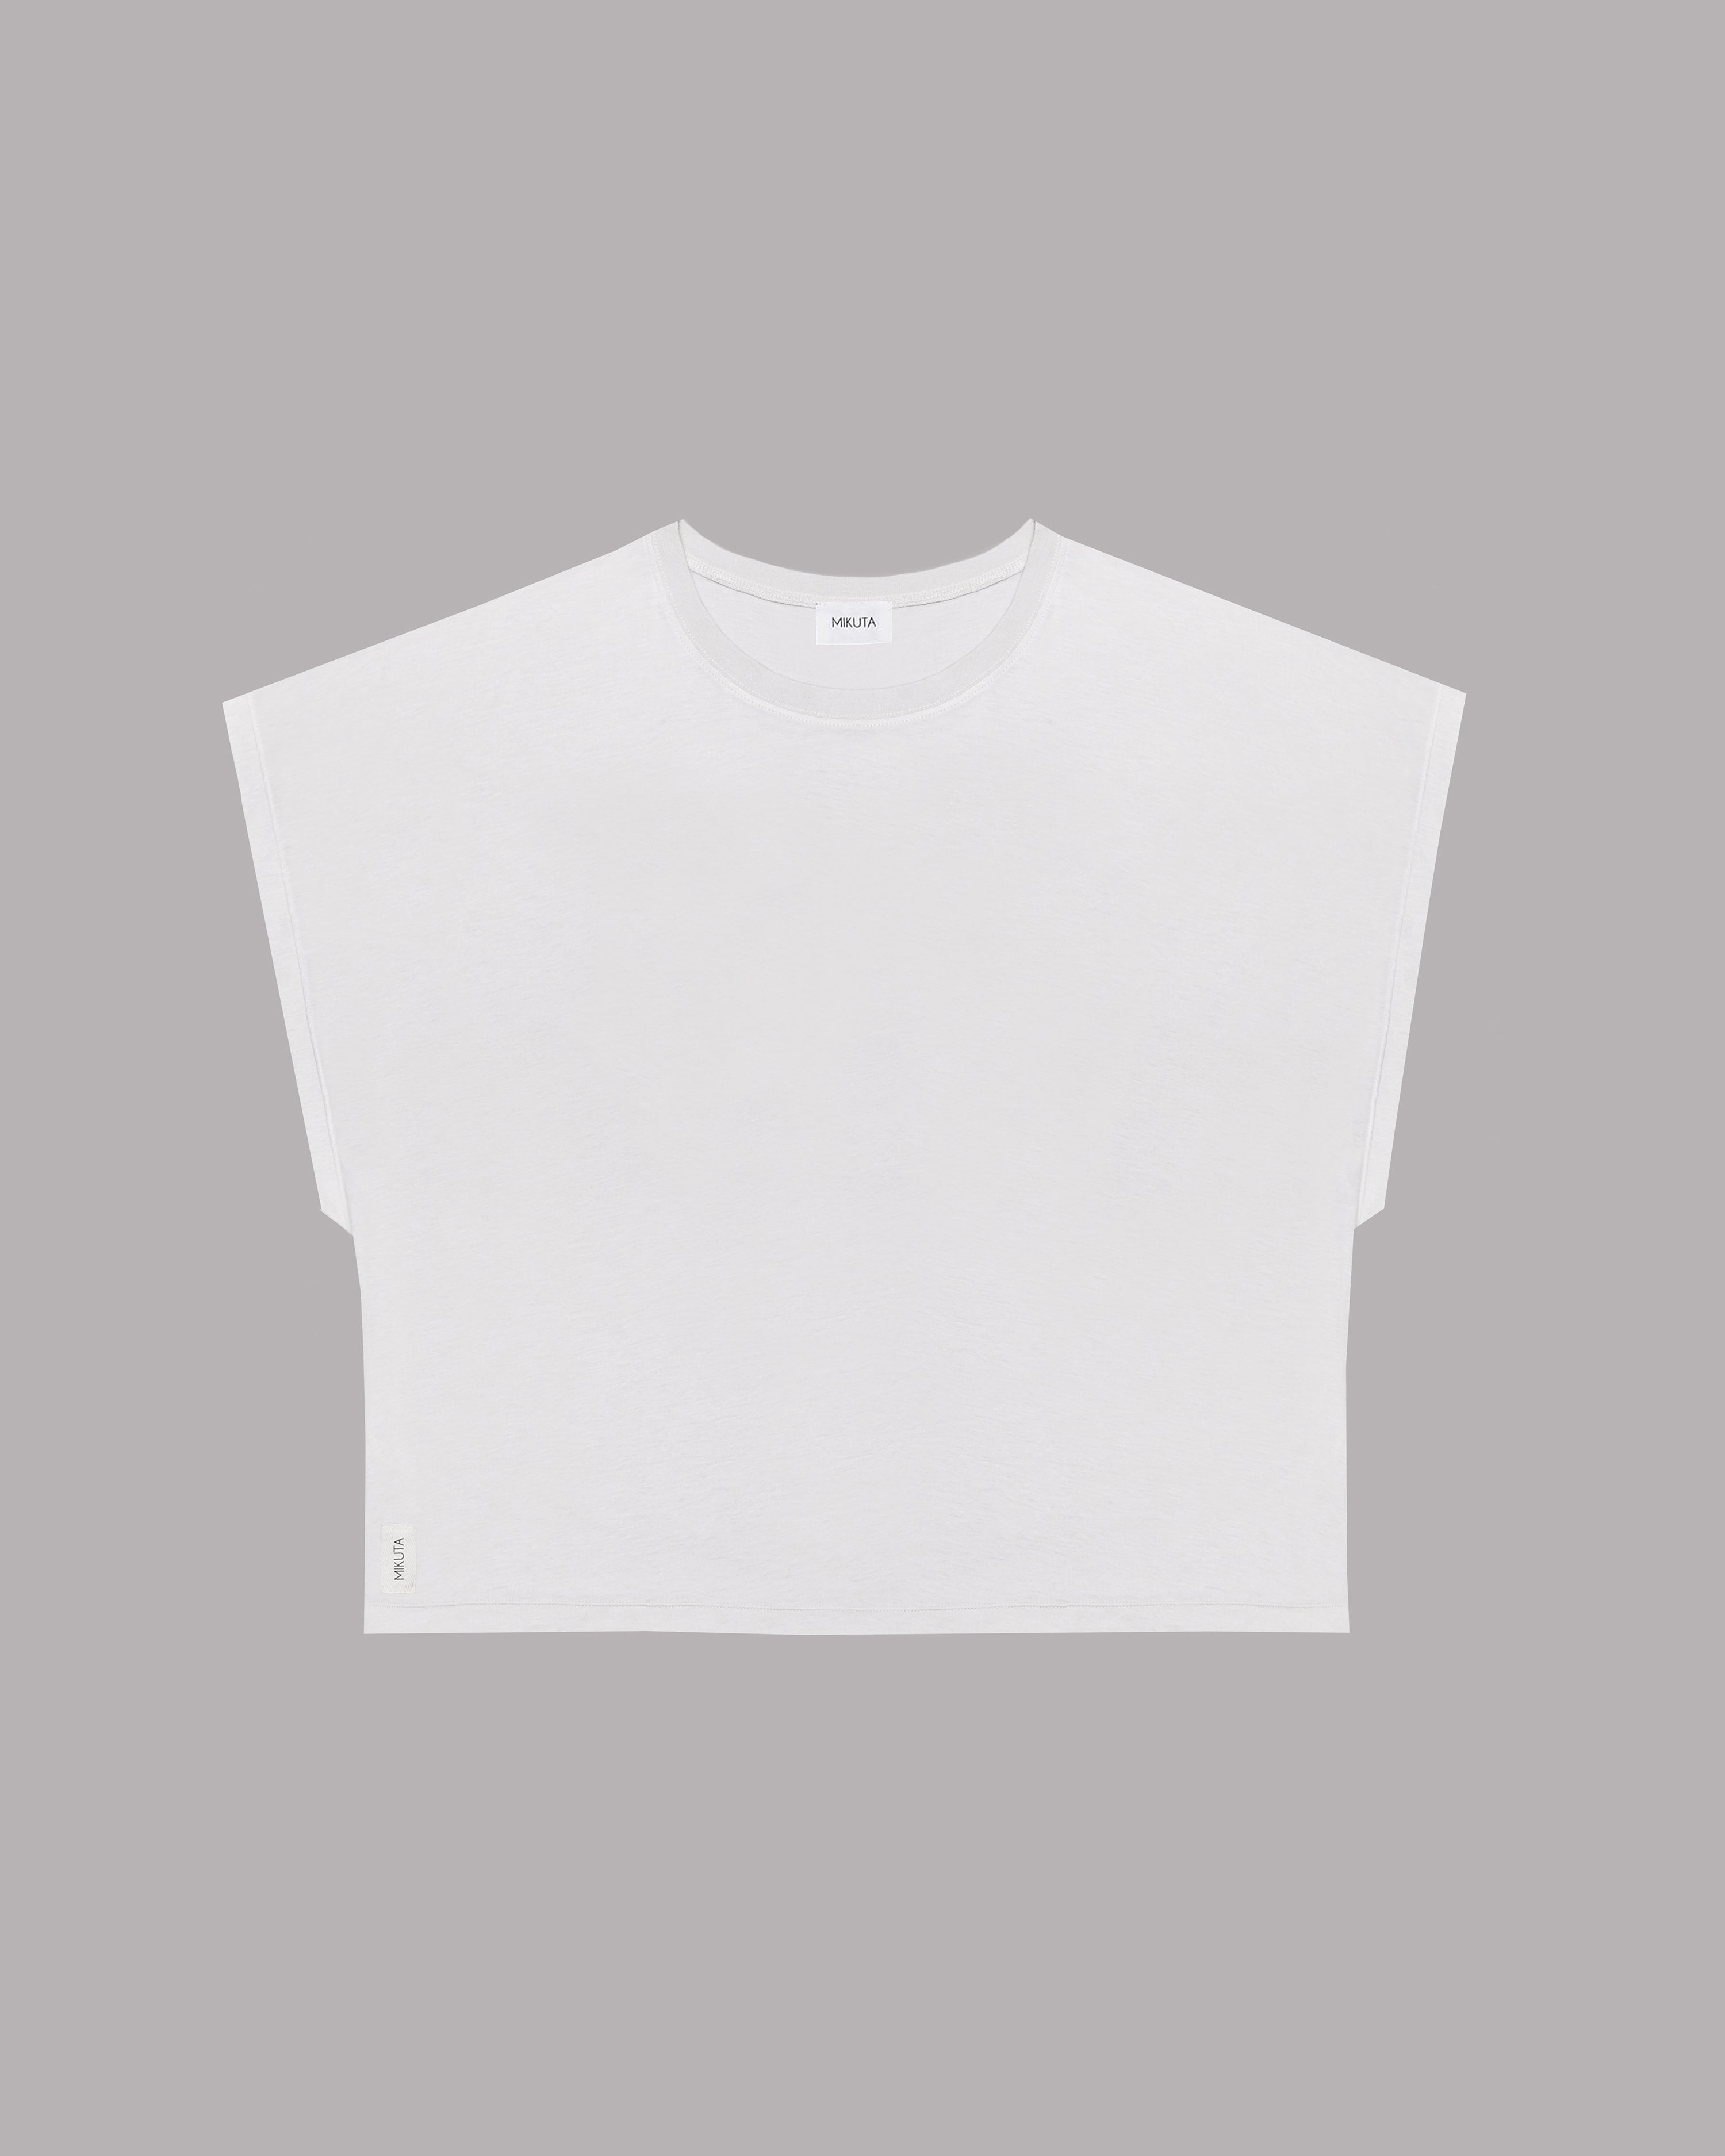 The White Thin Batwing T-Shirt